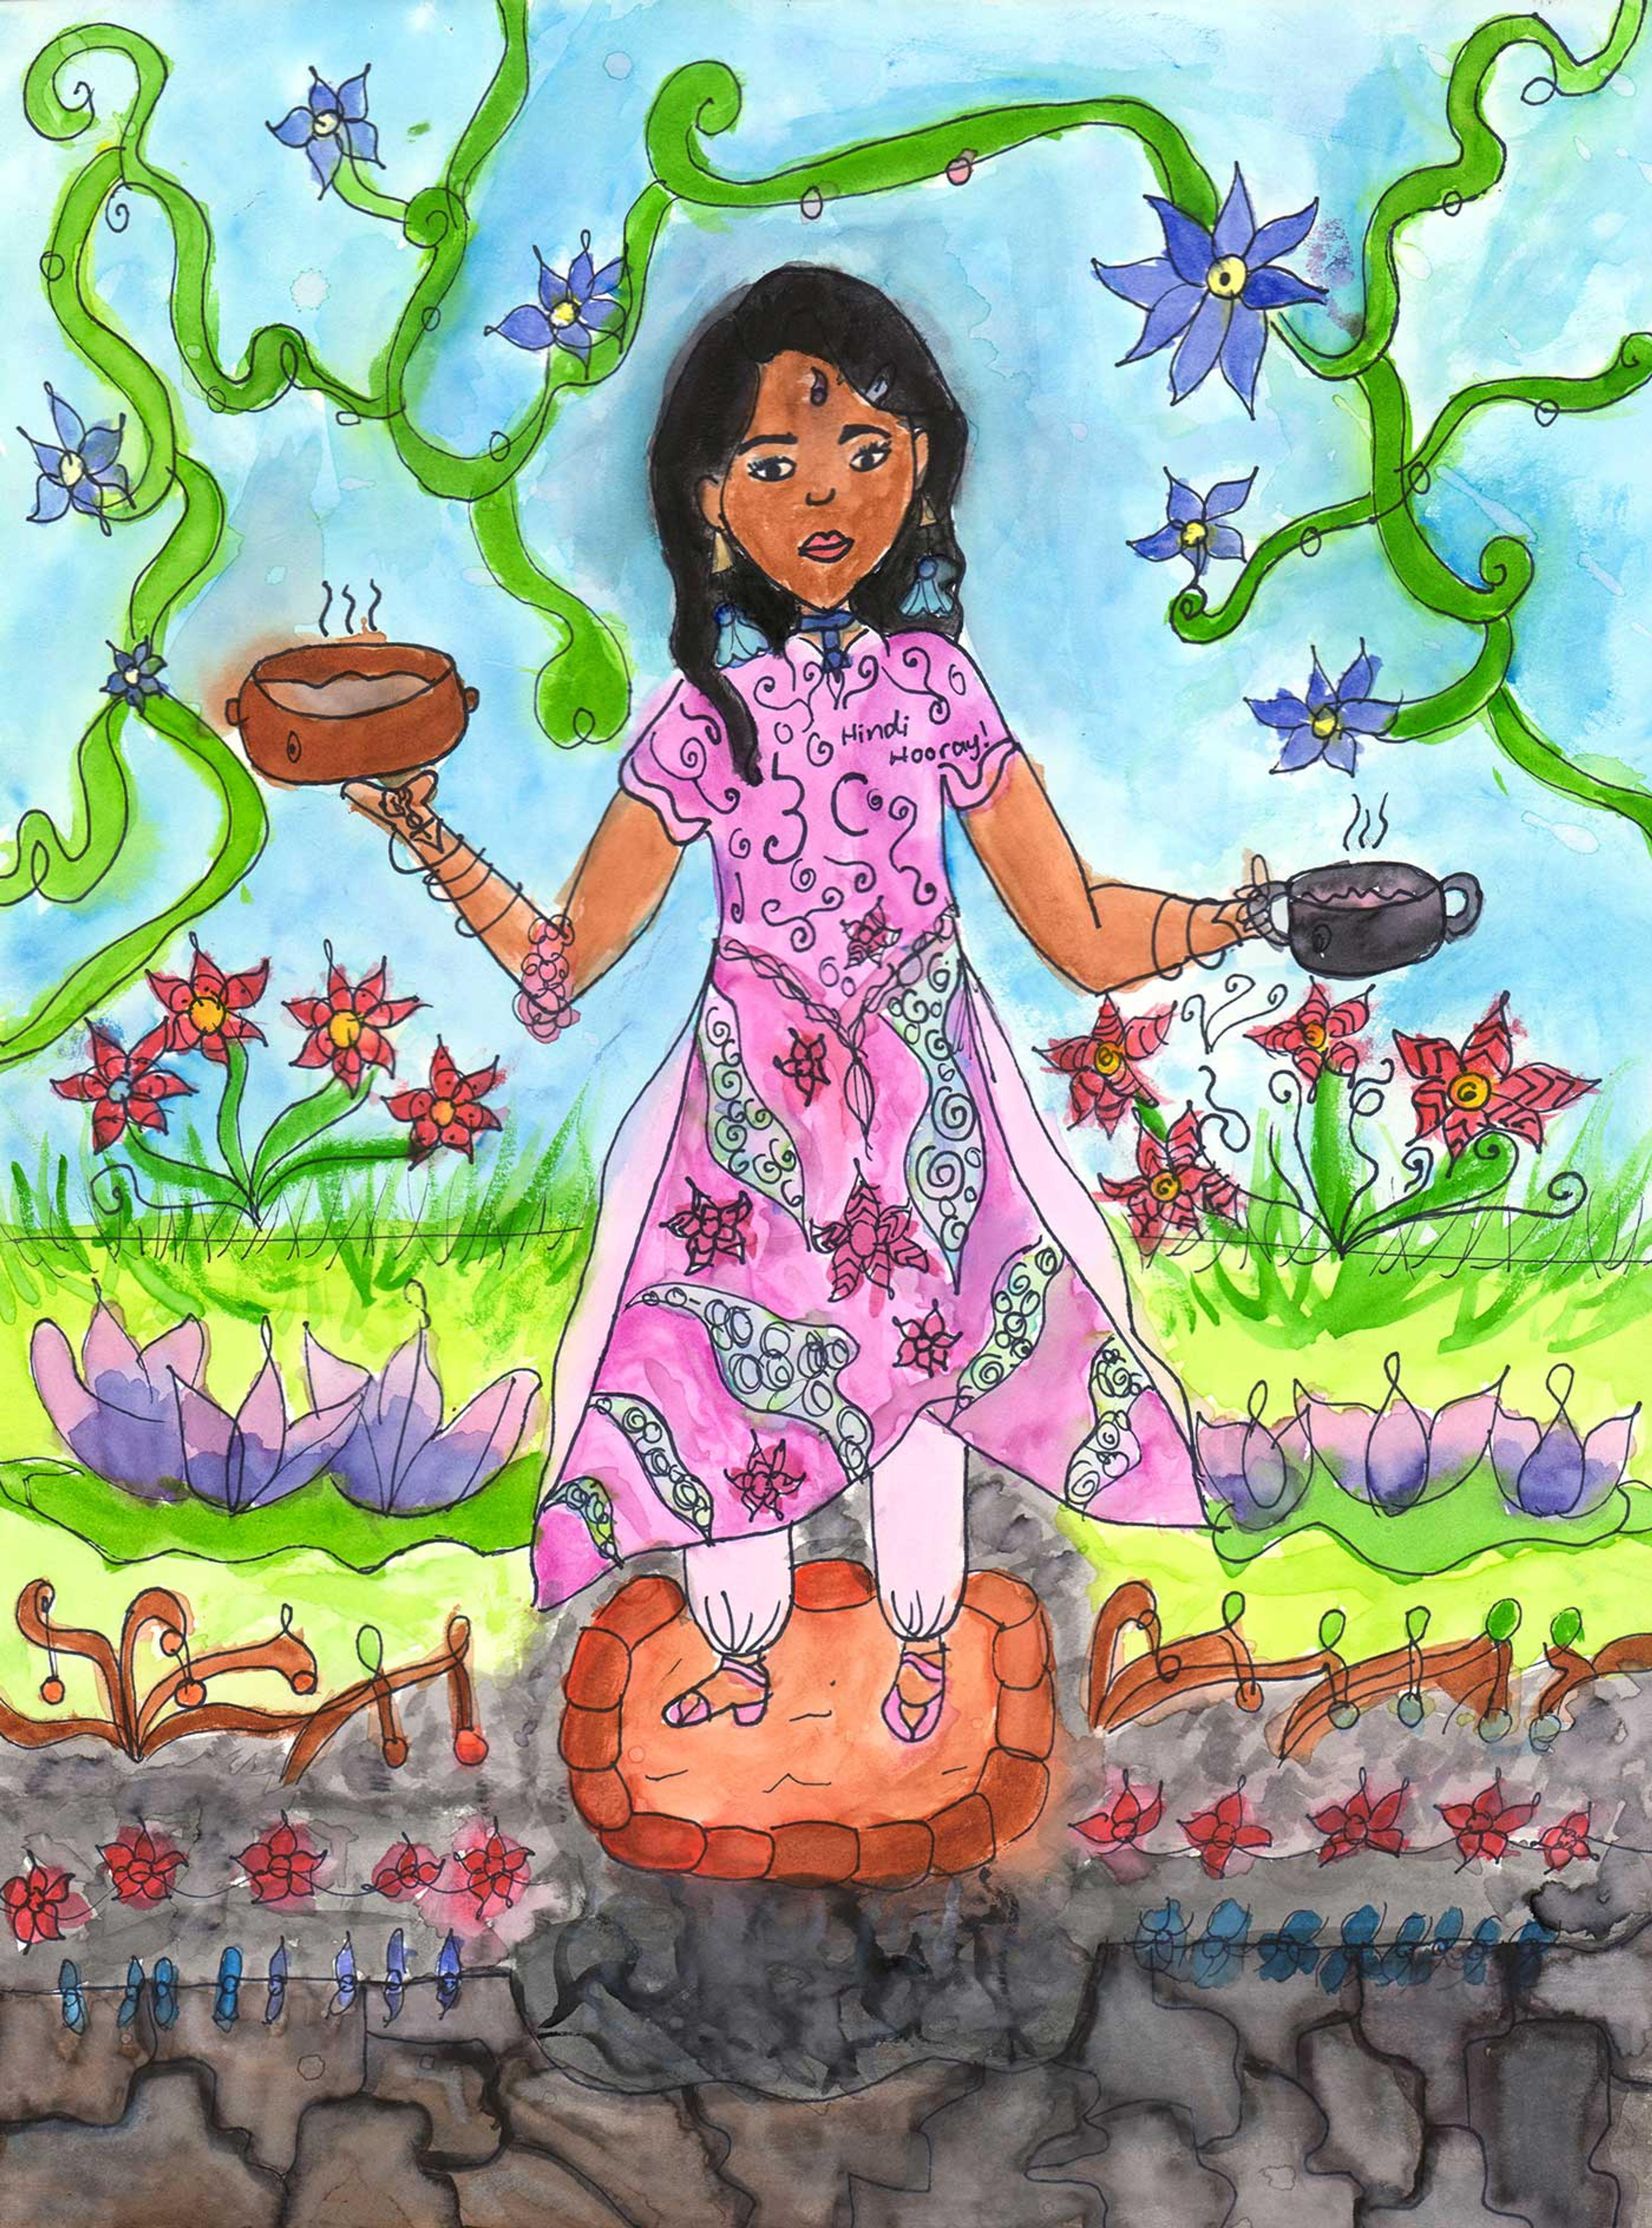 Painting of a girl with brown skin and black hair in a pink dress standing in a garden.